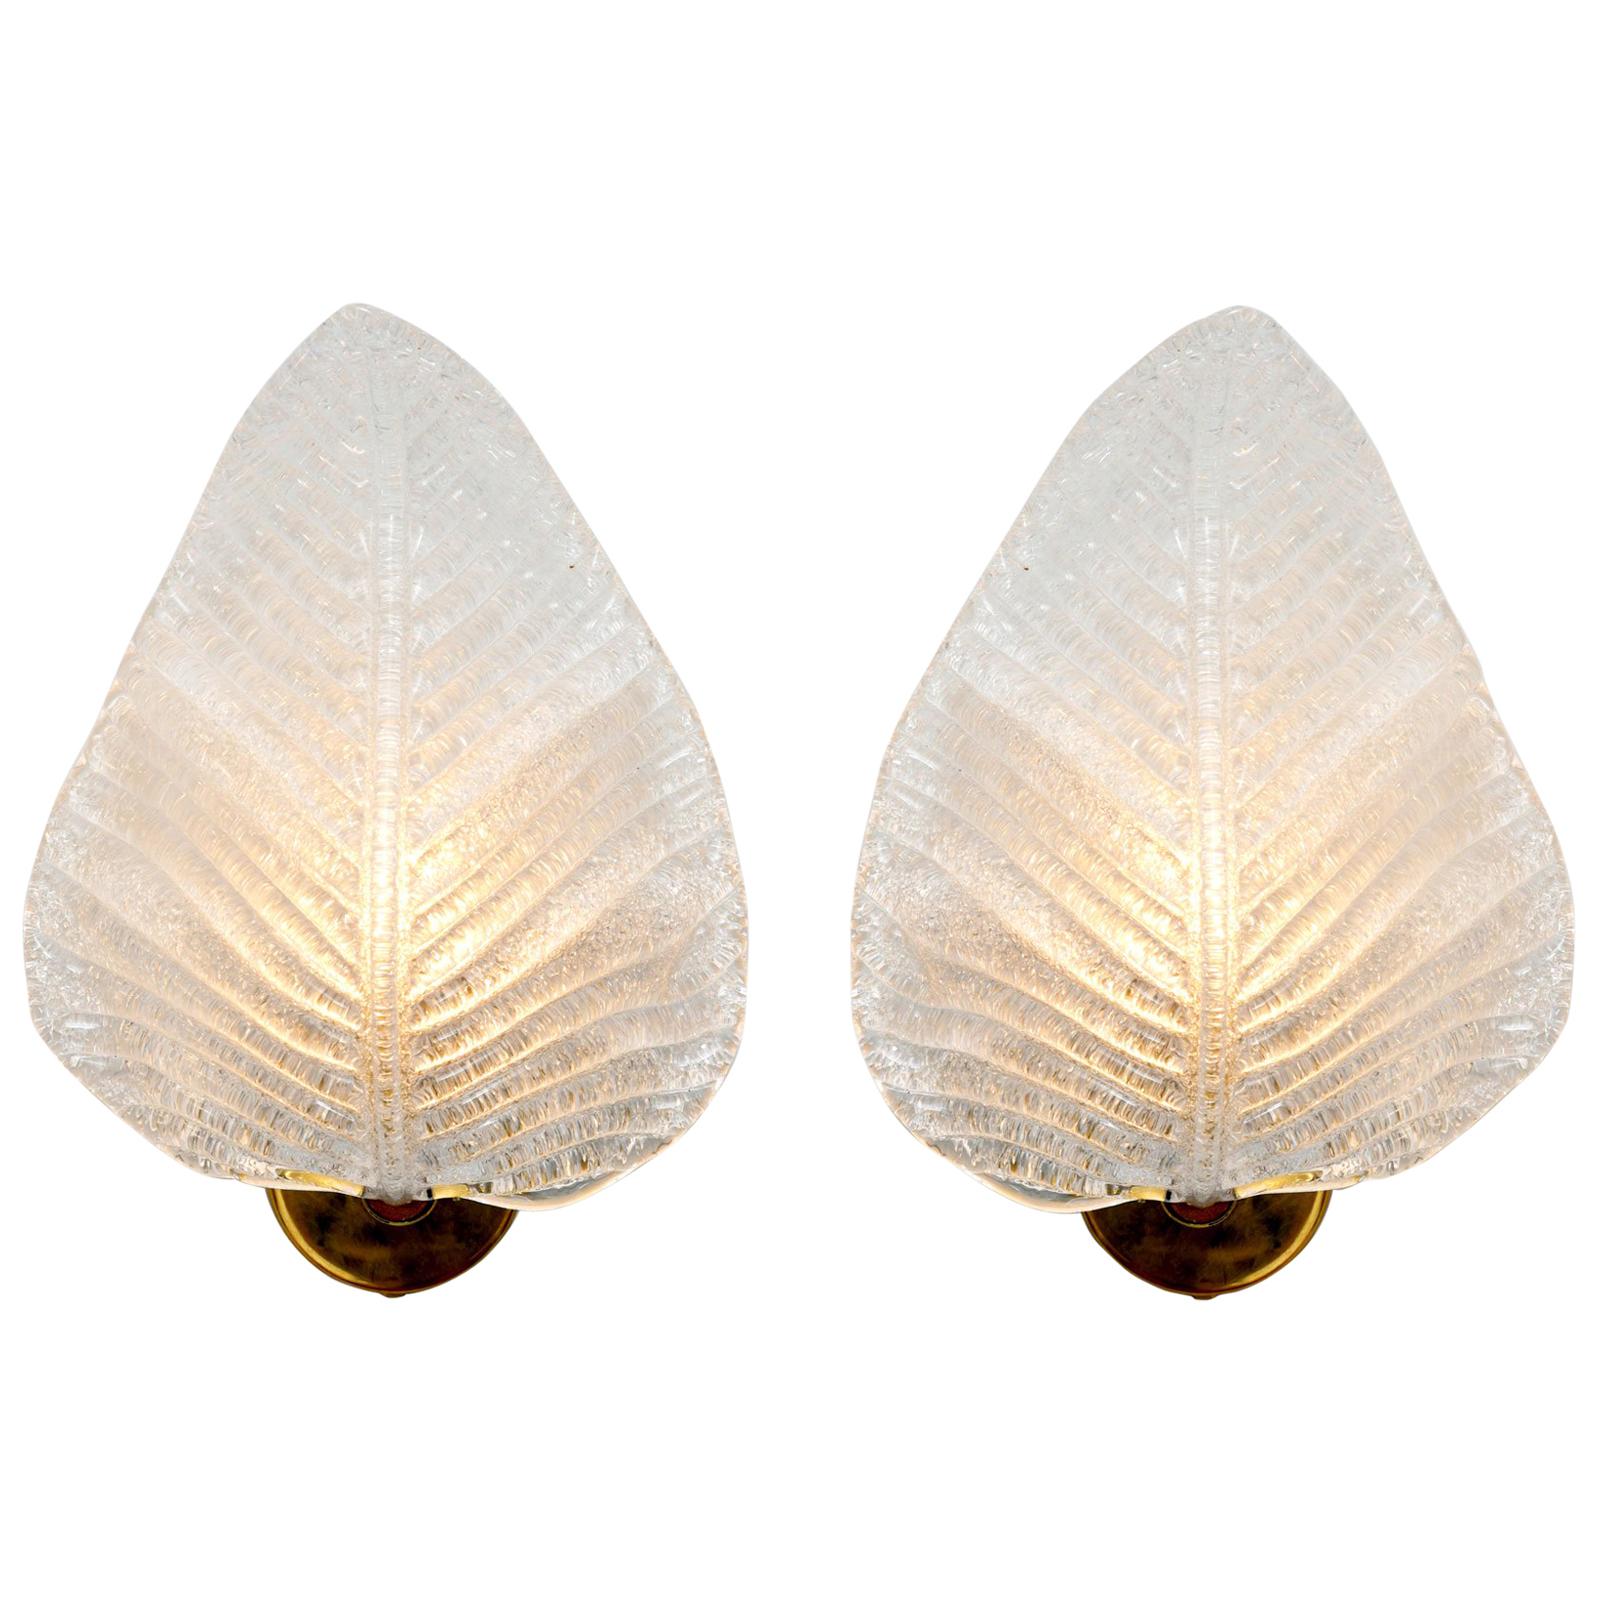 Pair of Murano Leaf Wall Lights